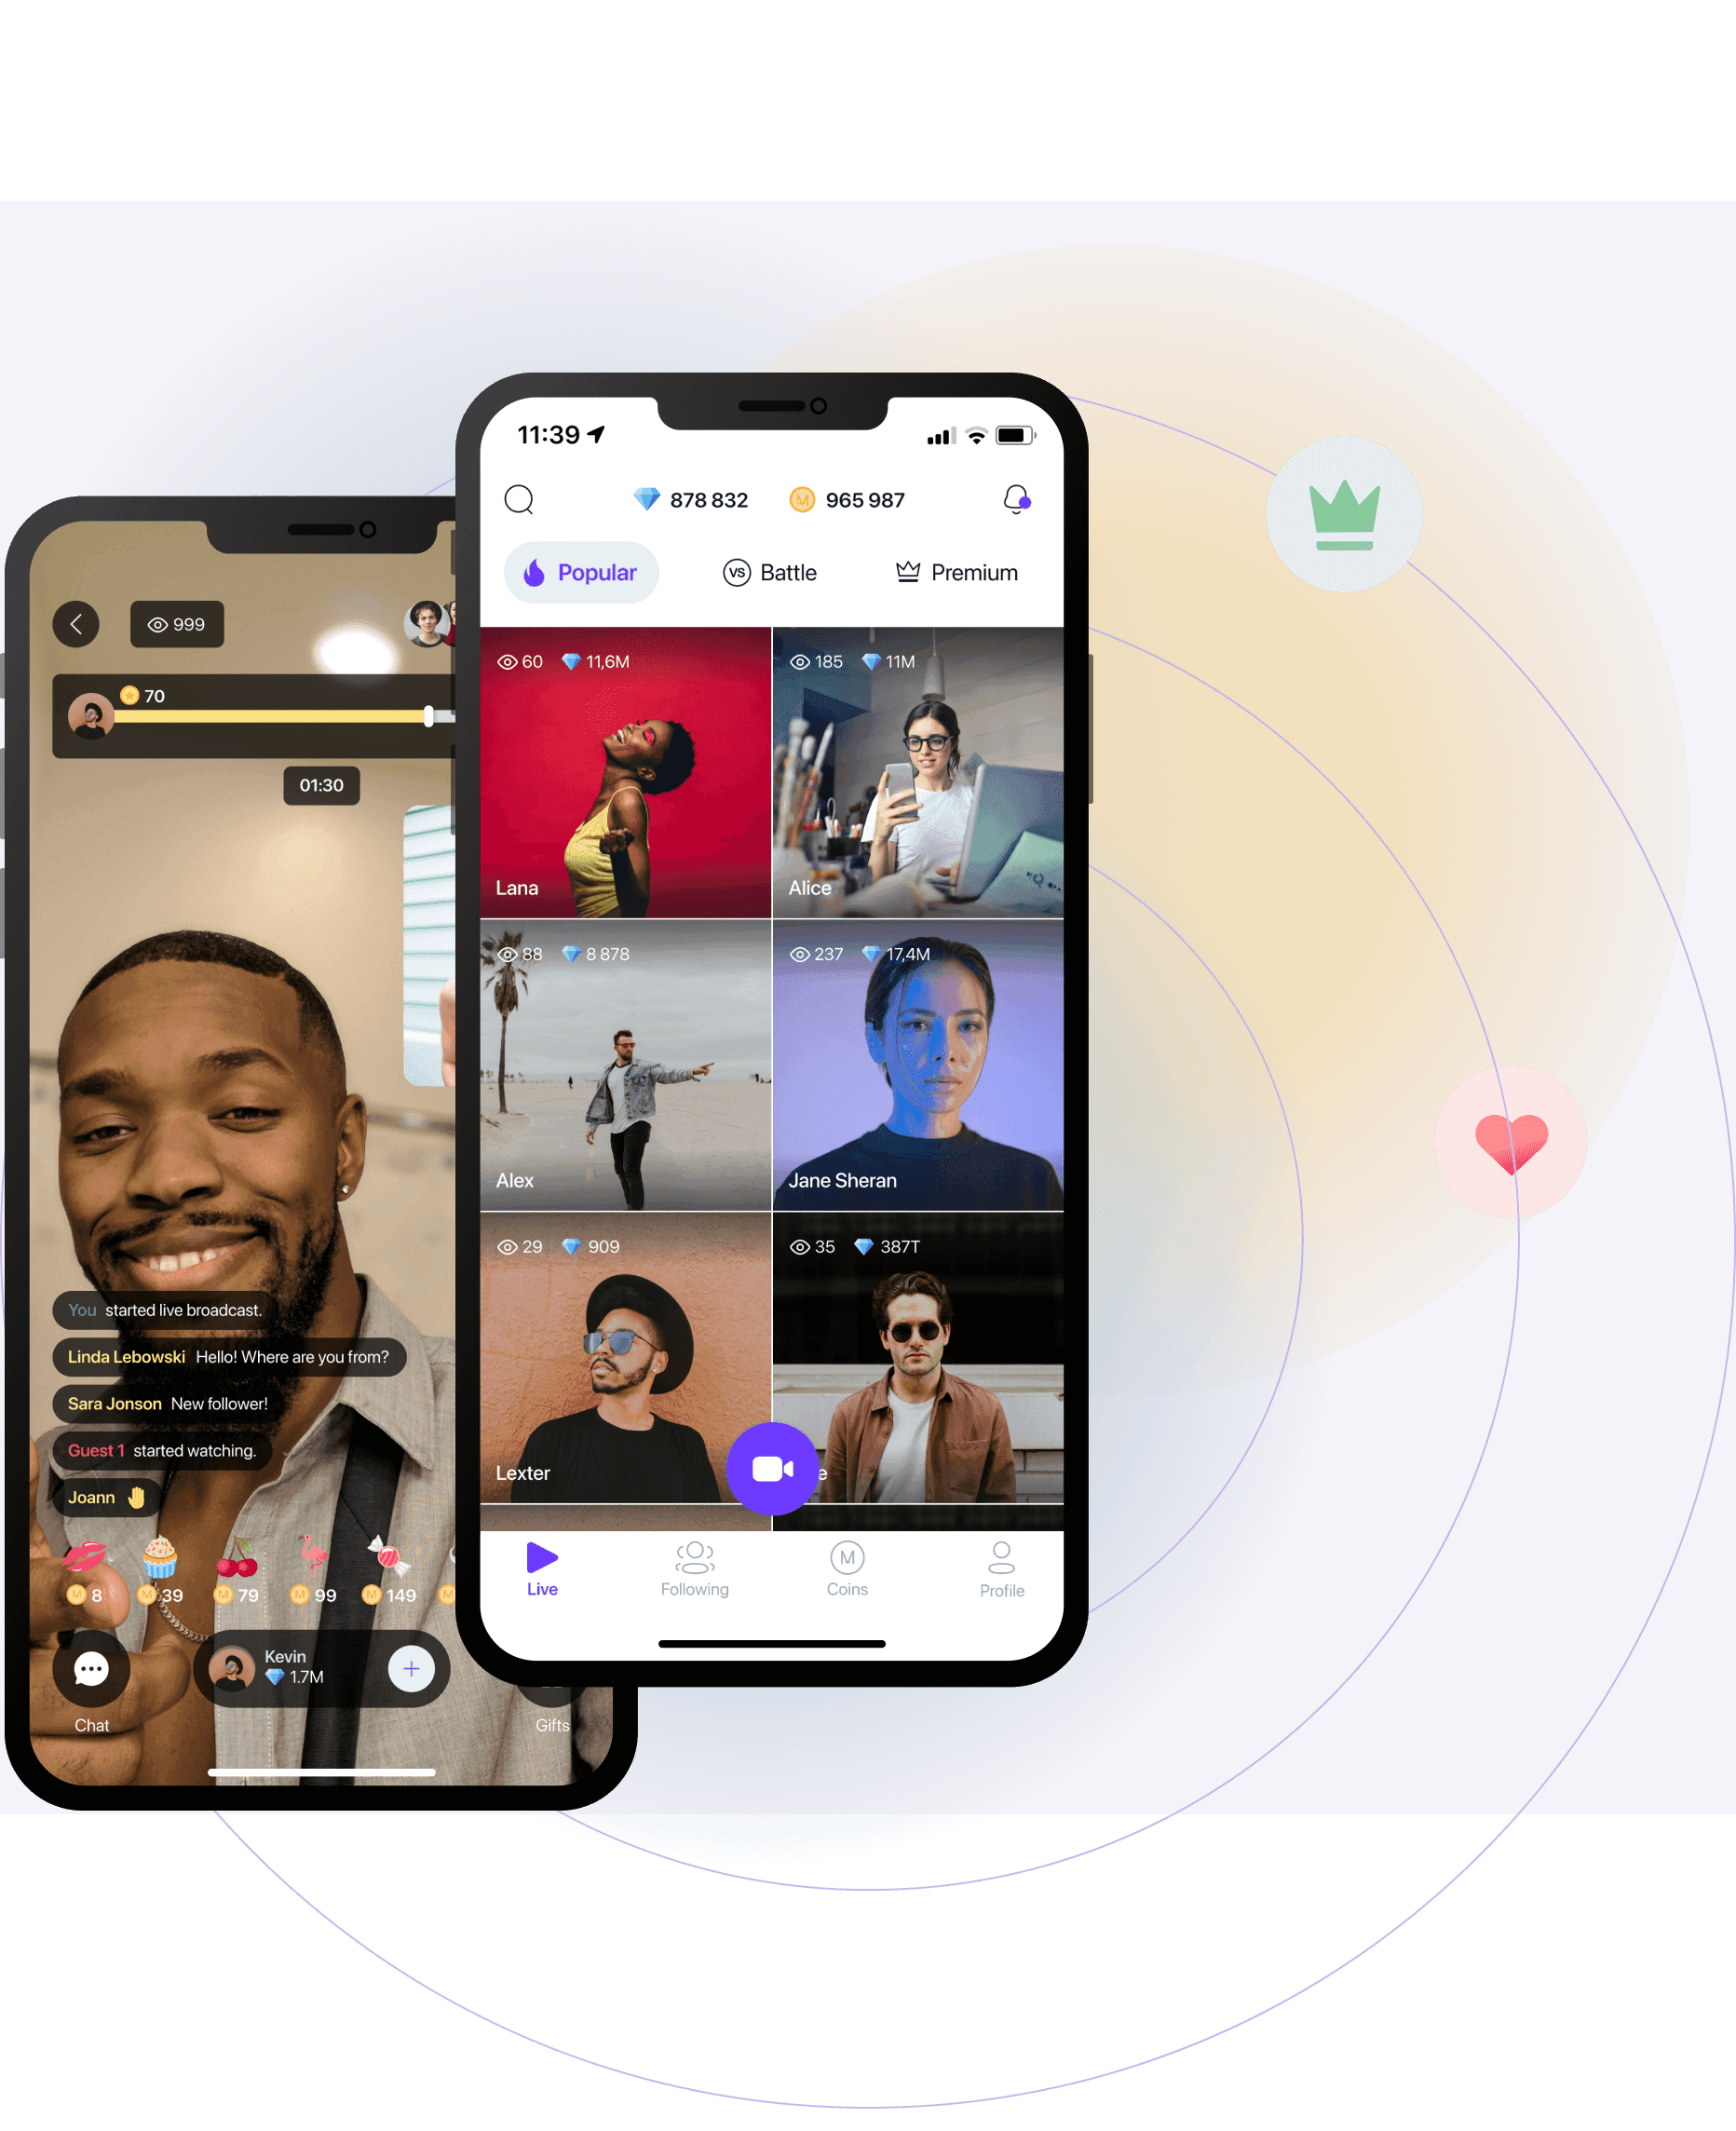 Live streaming: filters for video, chat, and video chat